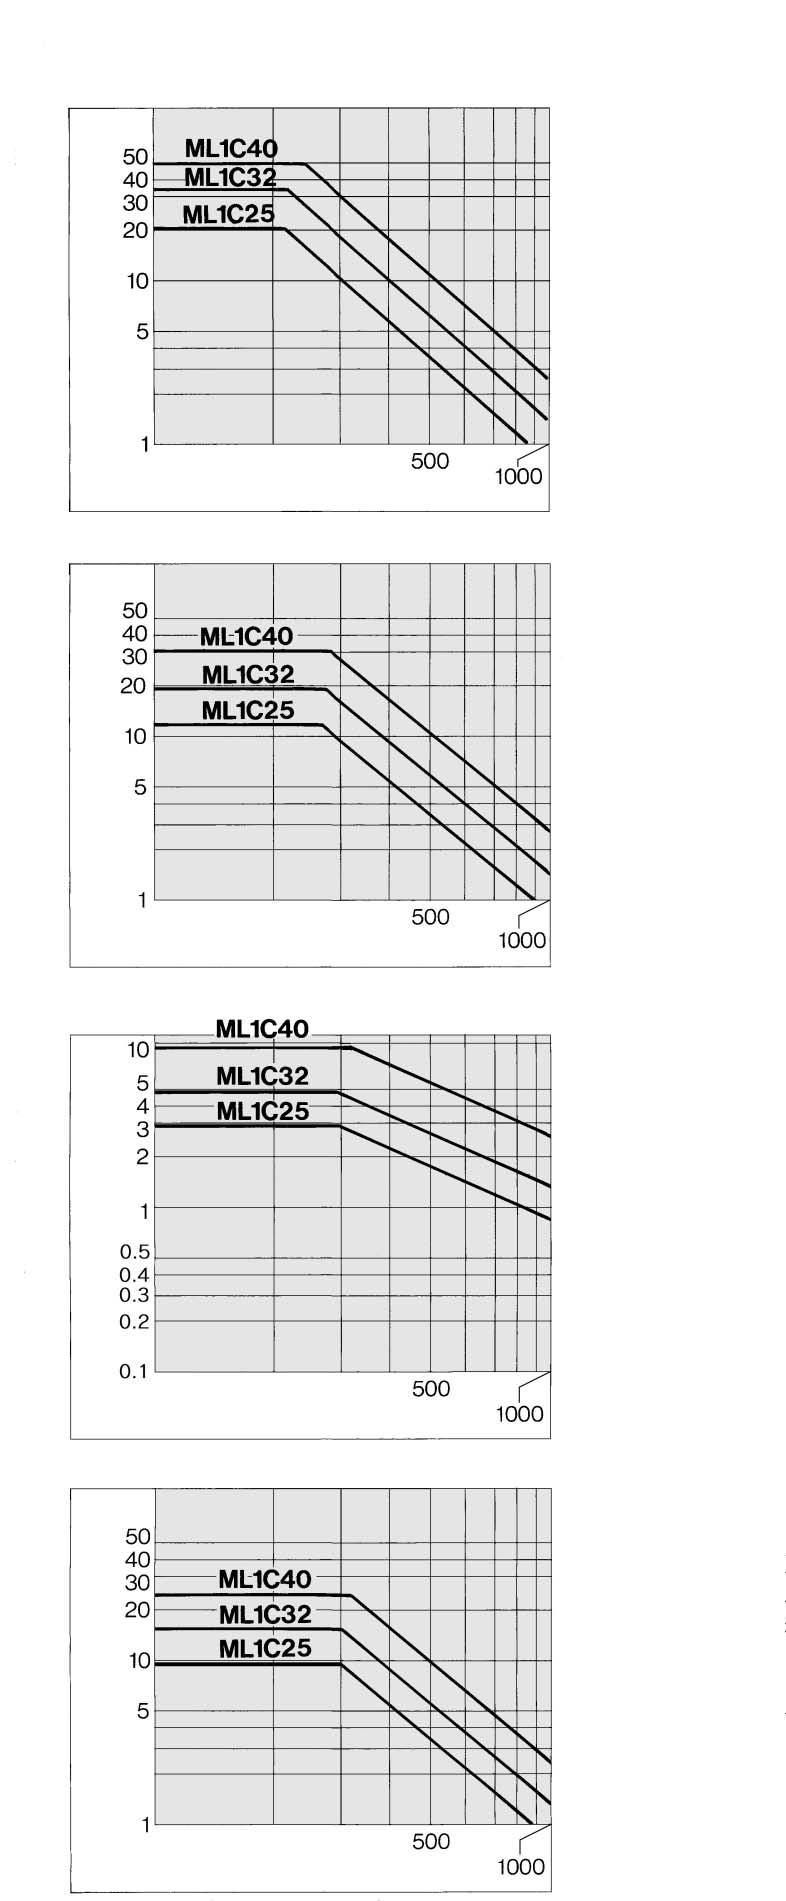 Maximum Load Weight Select the maximum load weight to be applied within the limits shown in the graph.